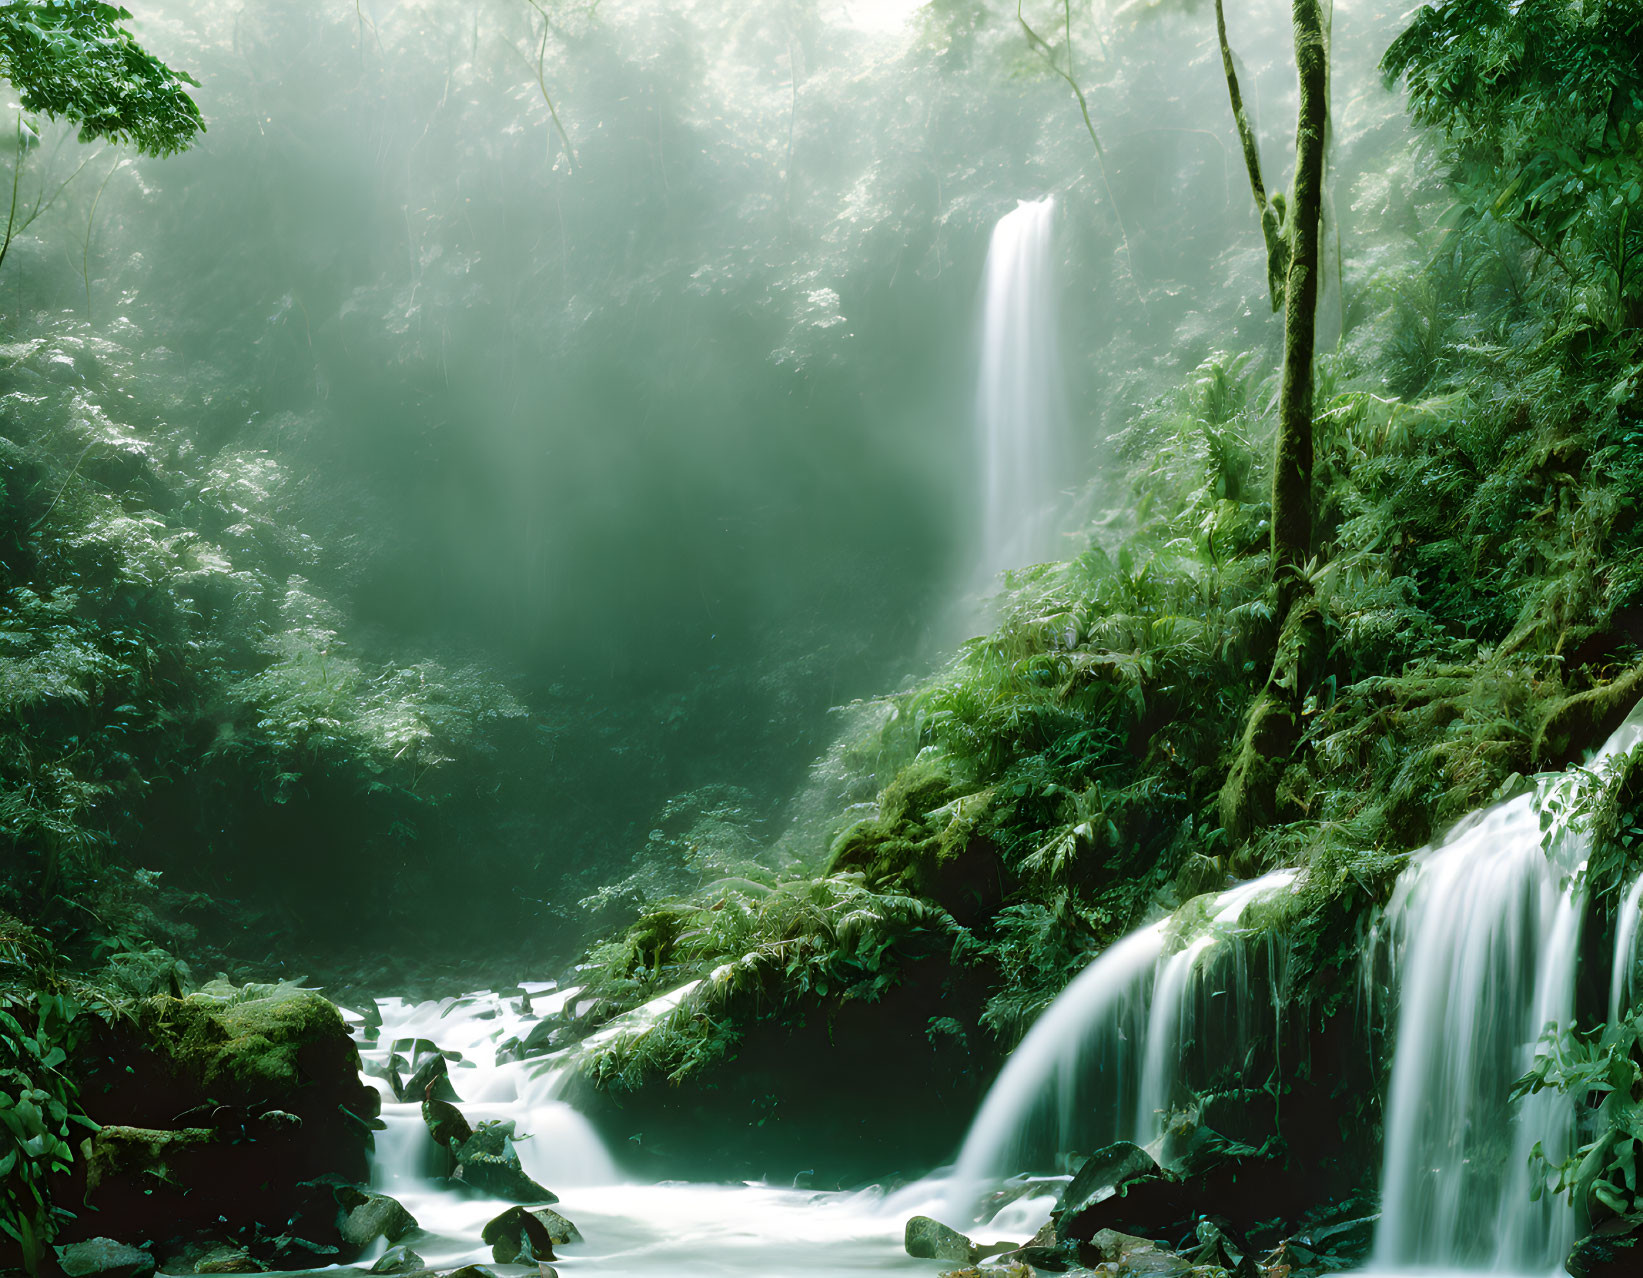 Tranquil misty forest waterfall scene